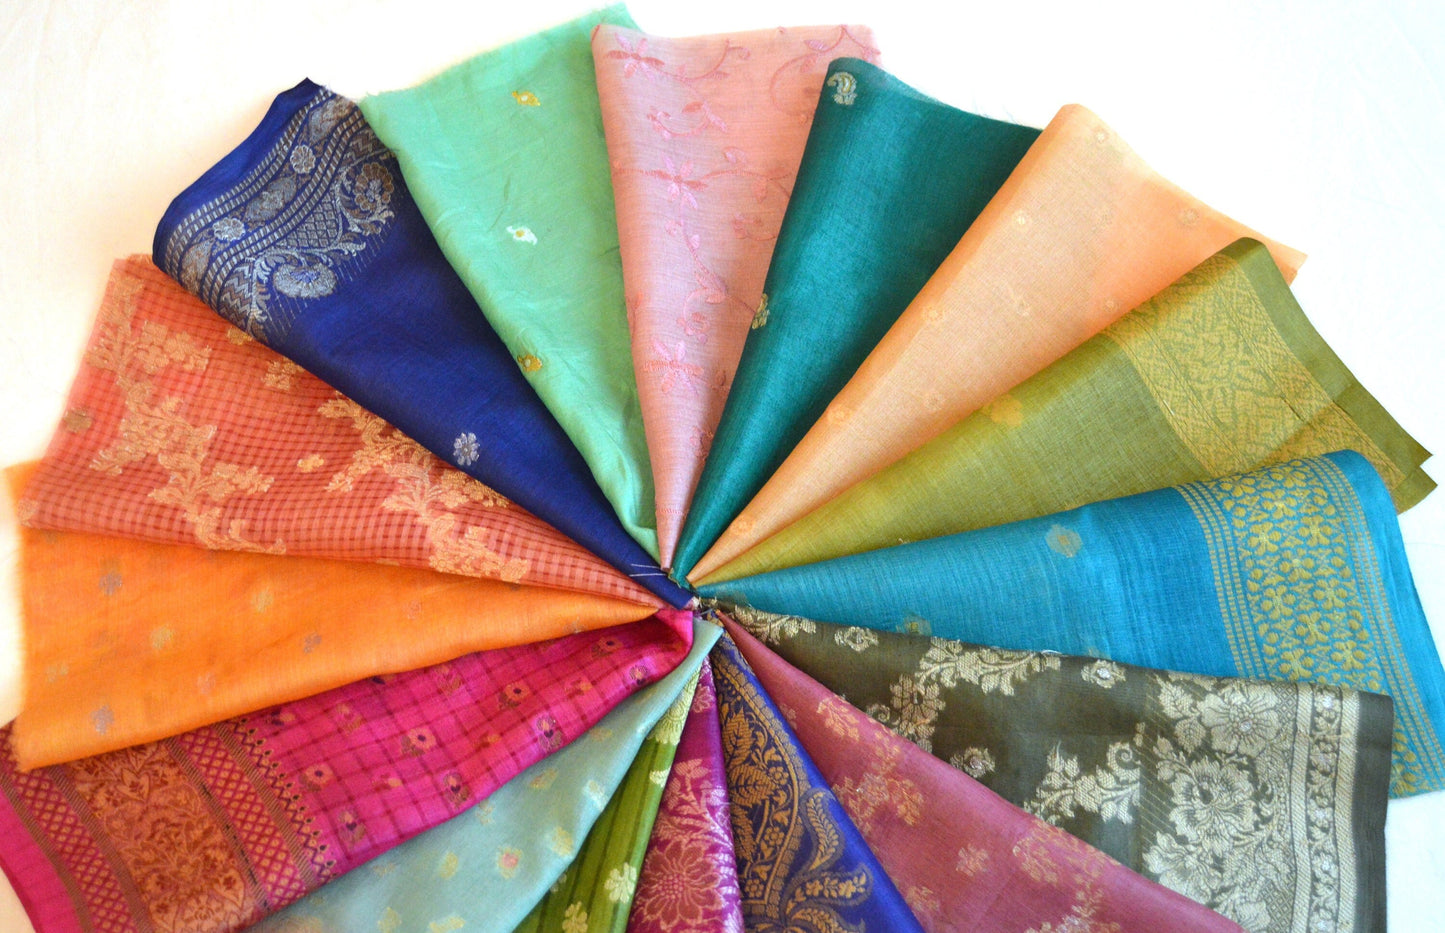 5 Inch x 16 Pieces Mixed Colour Upcycled Sari Silk Craft Fabric Card Making Collage Mixed Media Textile Art Sewing Junk Journals